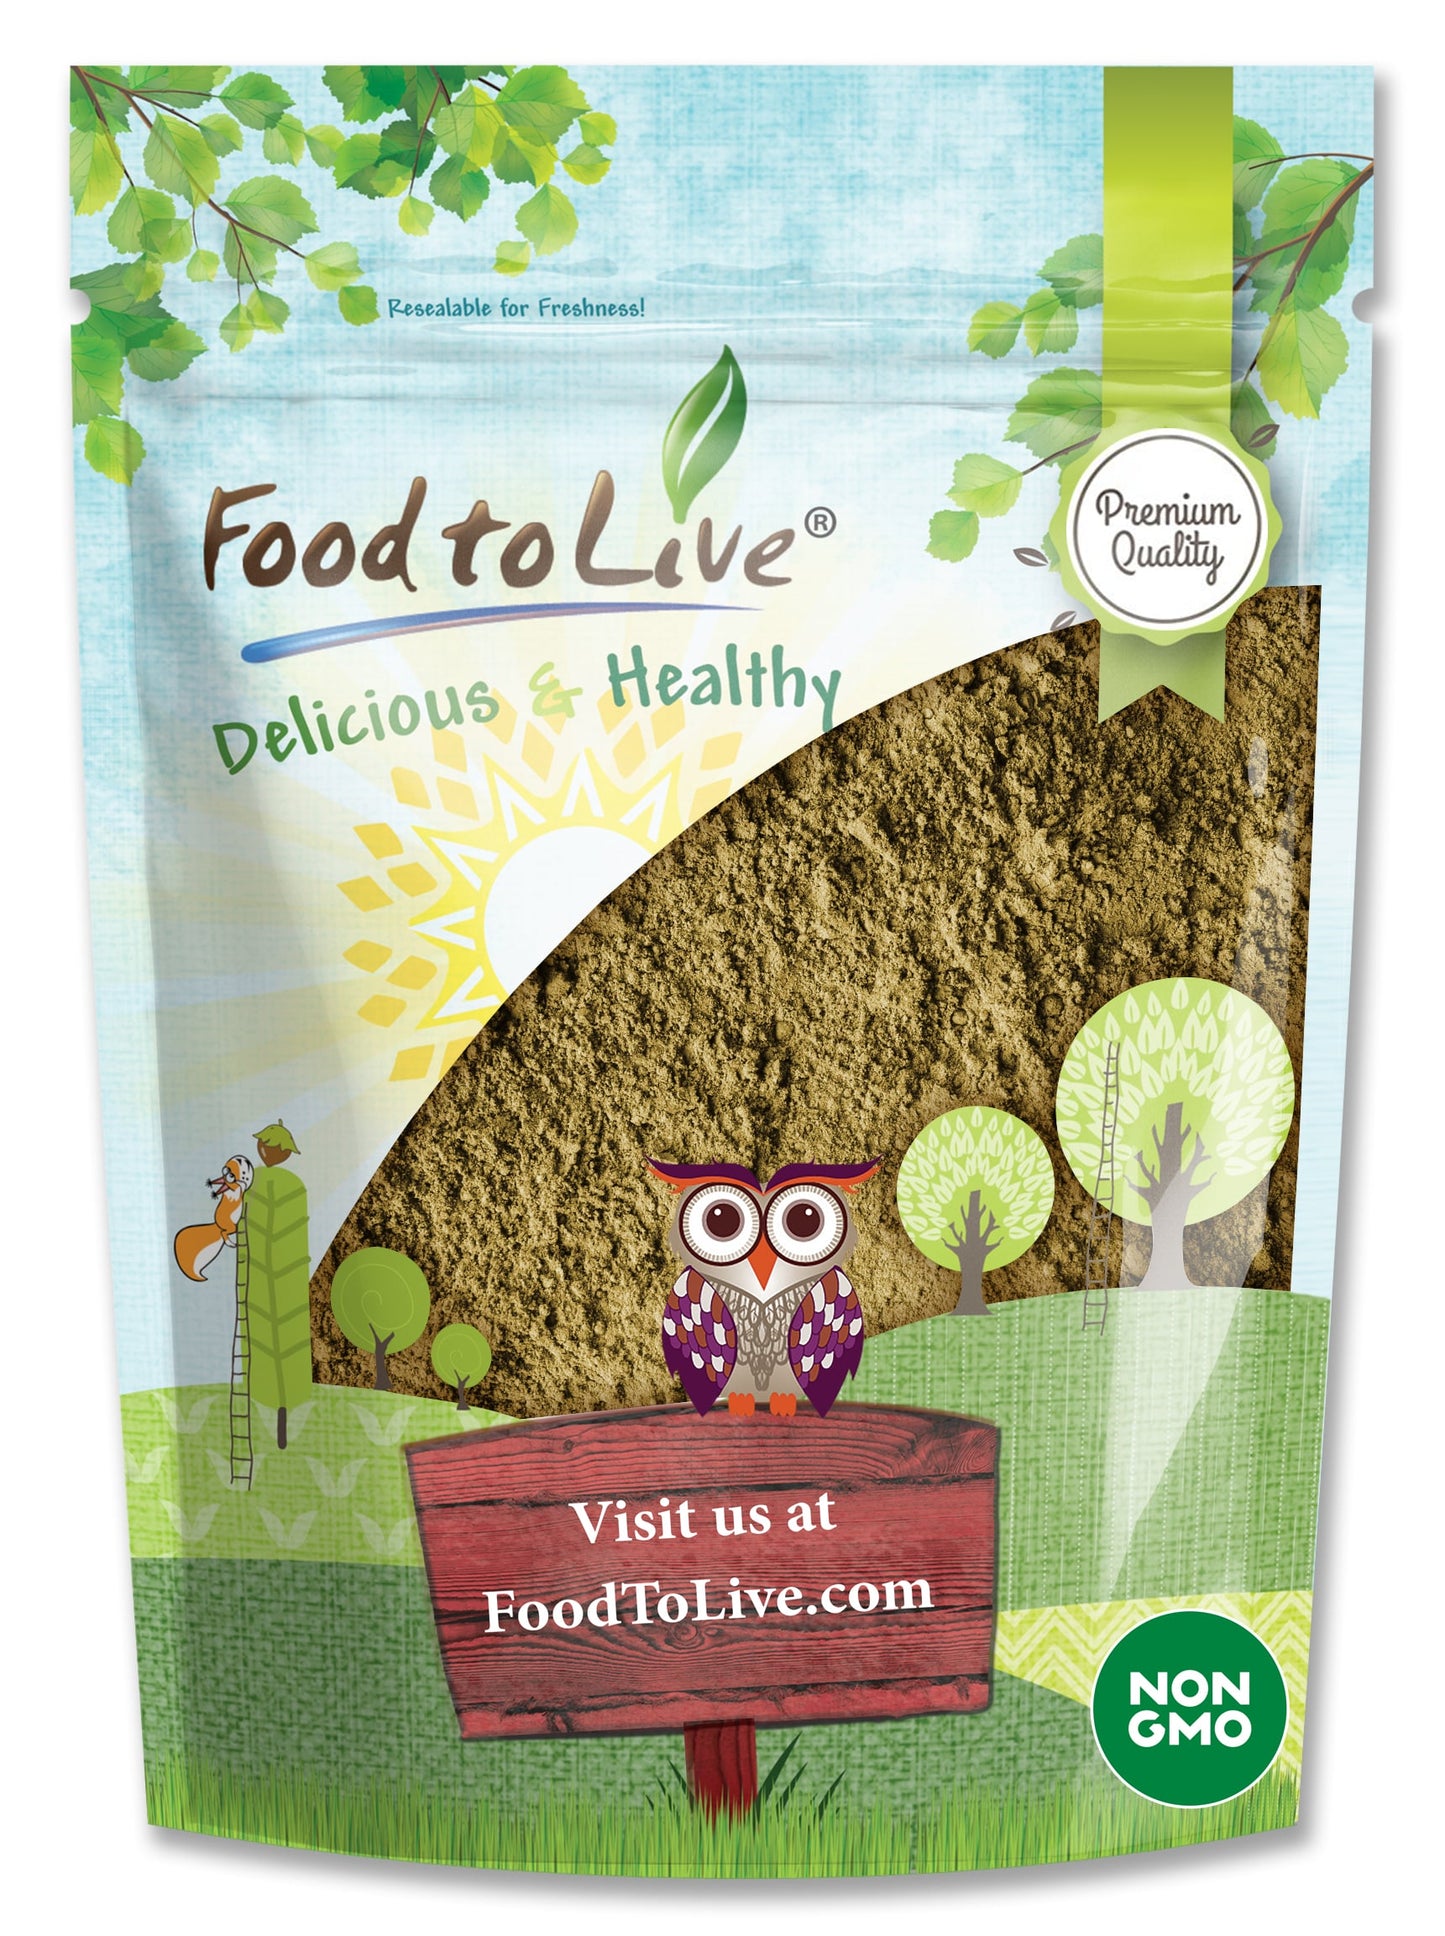 Kale Sprout Powder — Non-GMO Verified, Pure, Kosher, Vegan Superfood, Bulk, Rich in Sulforaphane, Sirtfood - by Food to Live